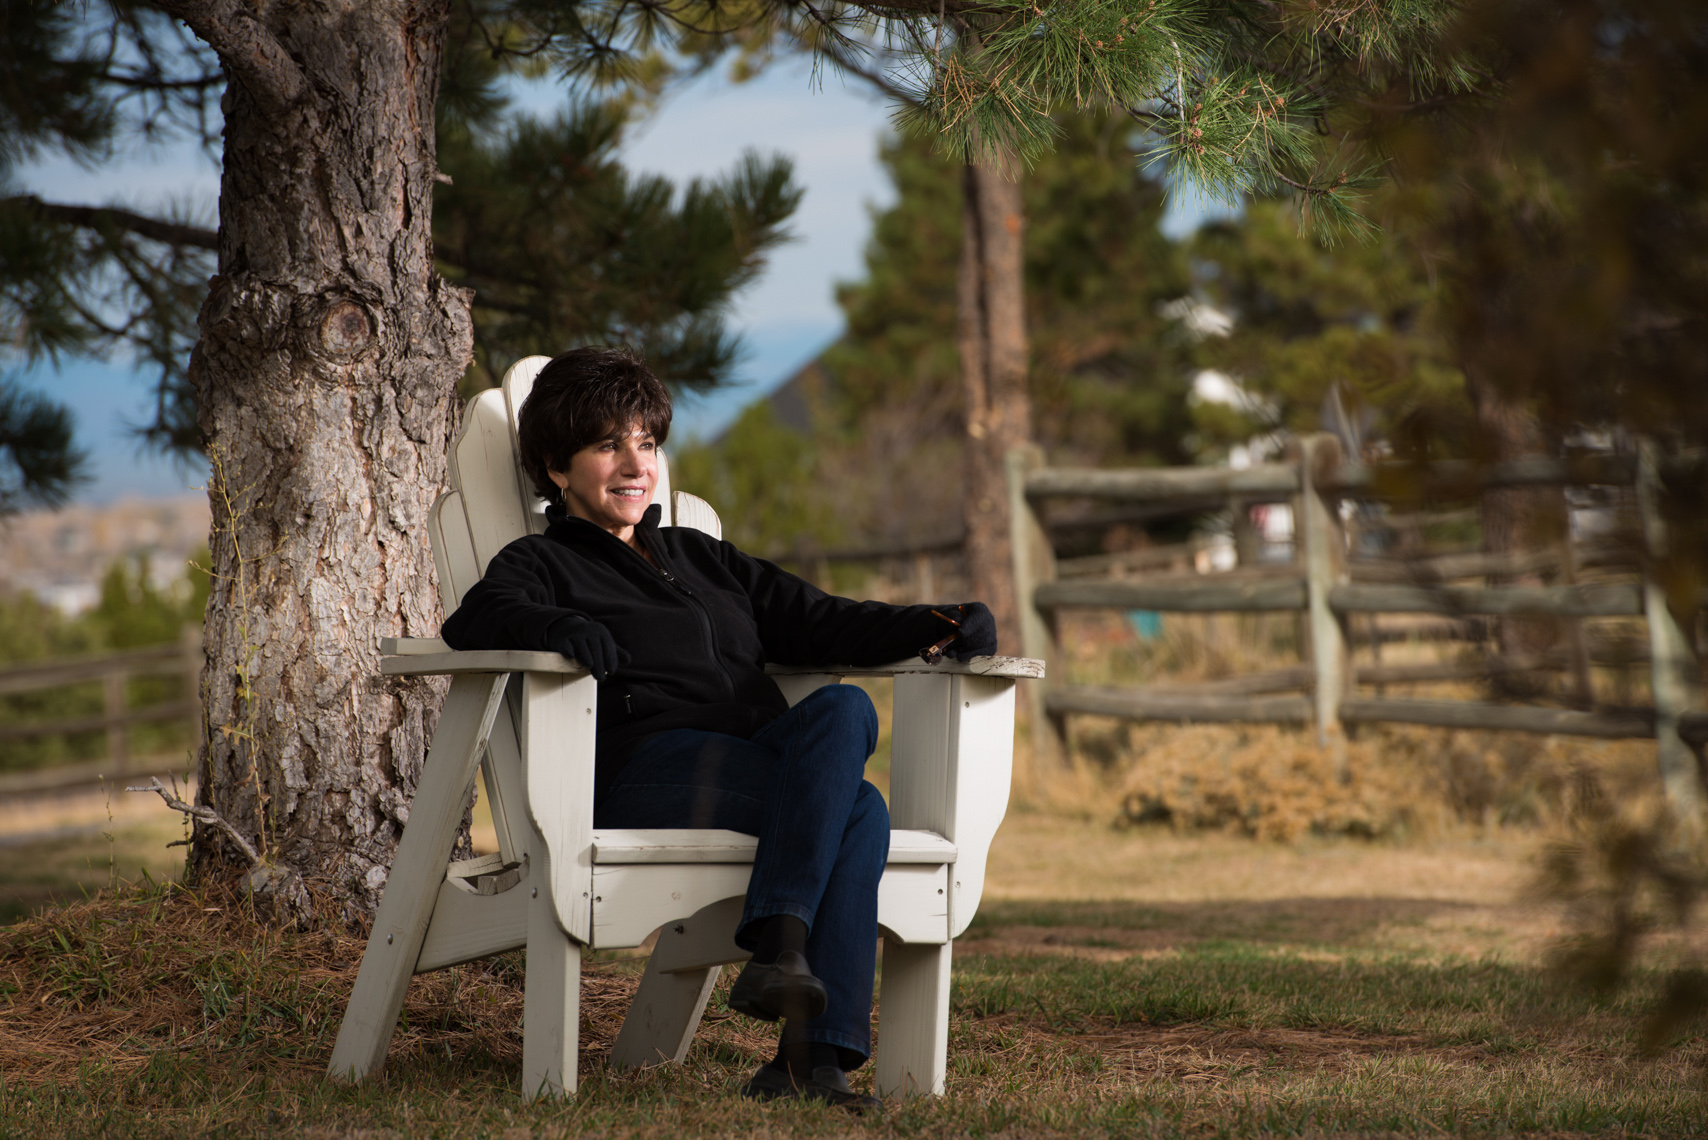 woman in adirondack chair in wooded environment in sububan Denver, Colorado